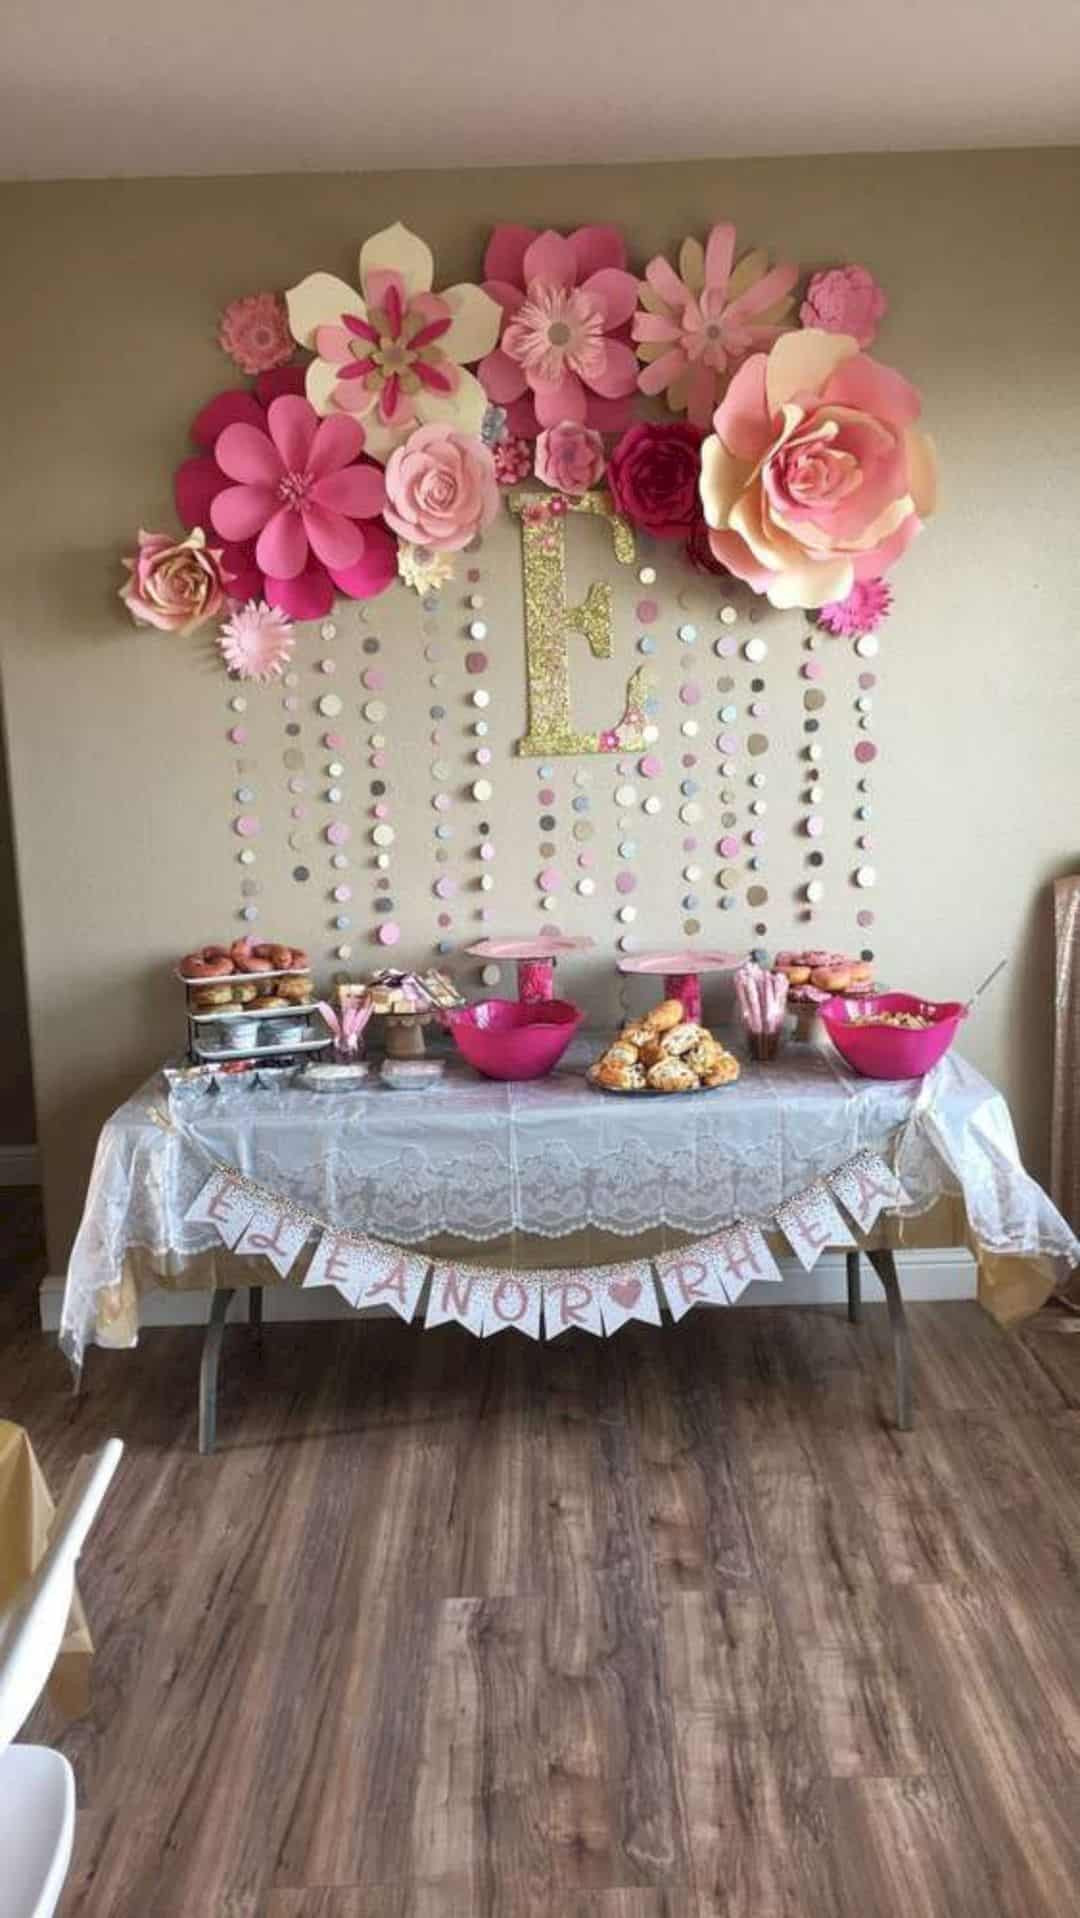 Baby Shower Wall Decoration Ideas
 16 Cute Baby Shower Decorating Ideas